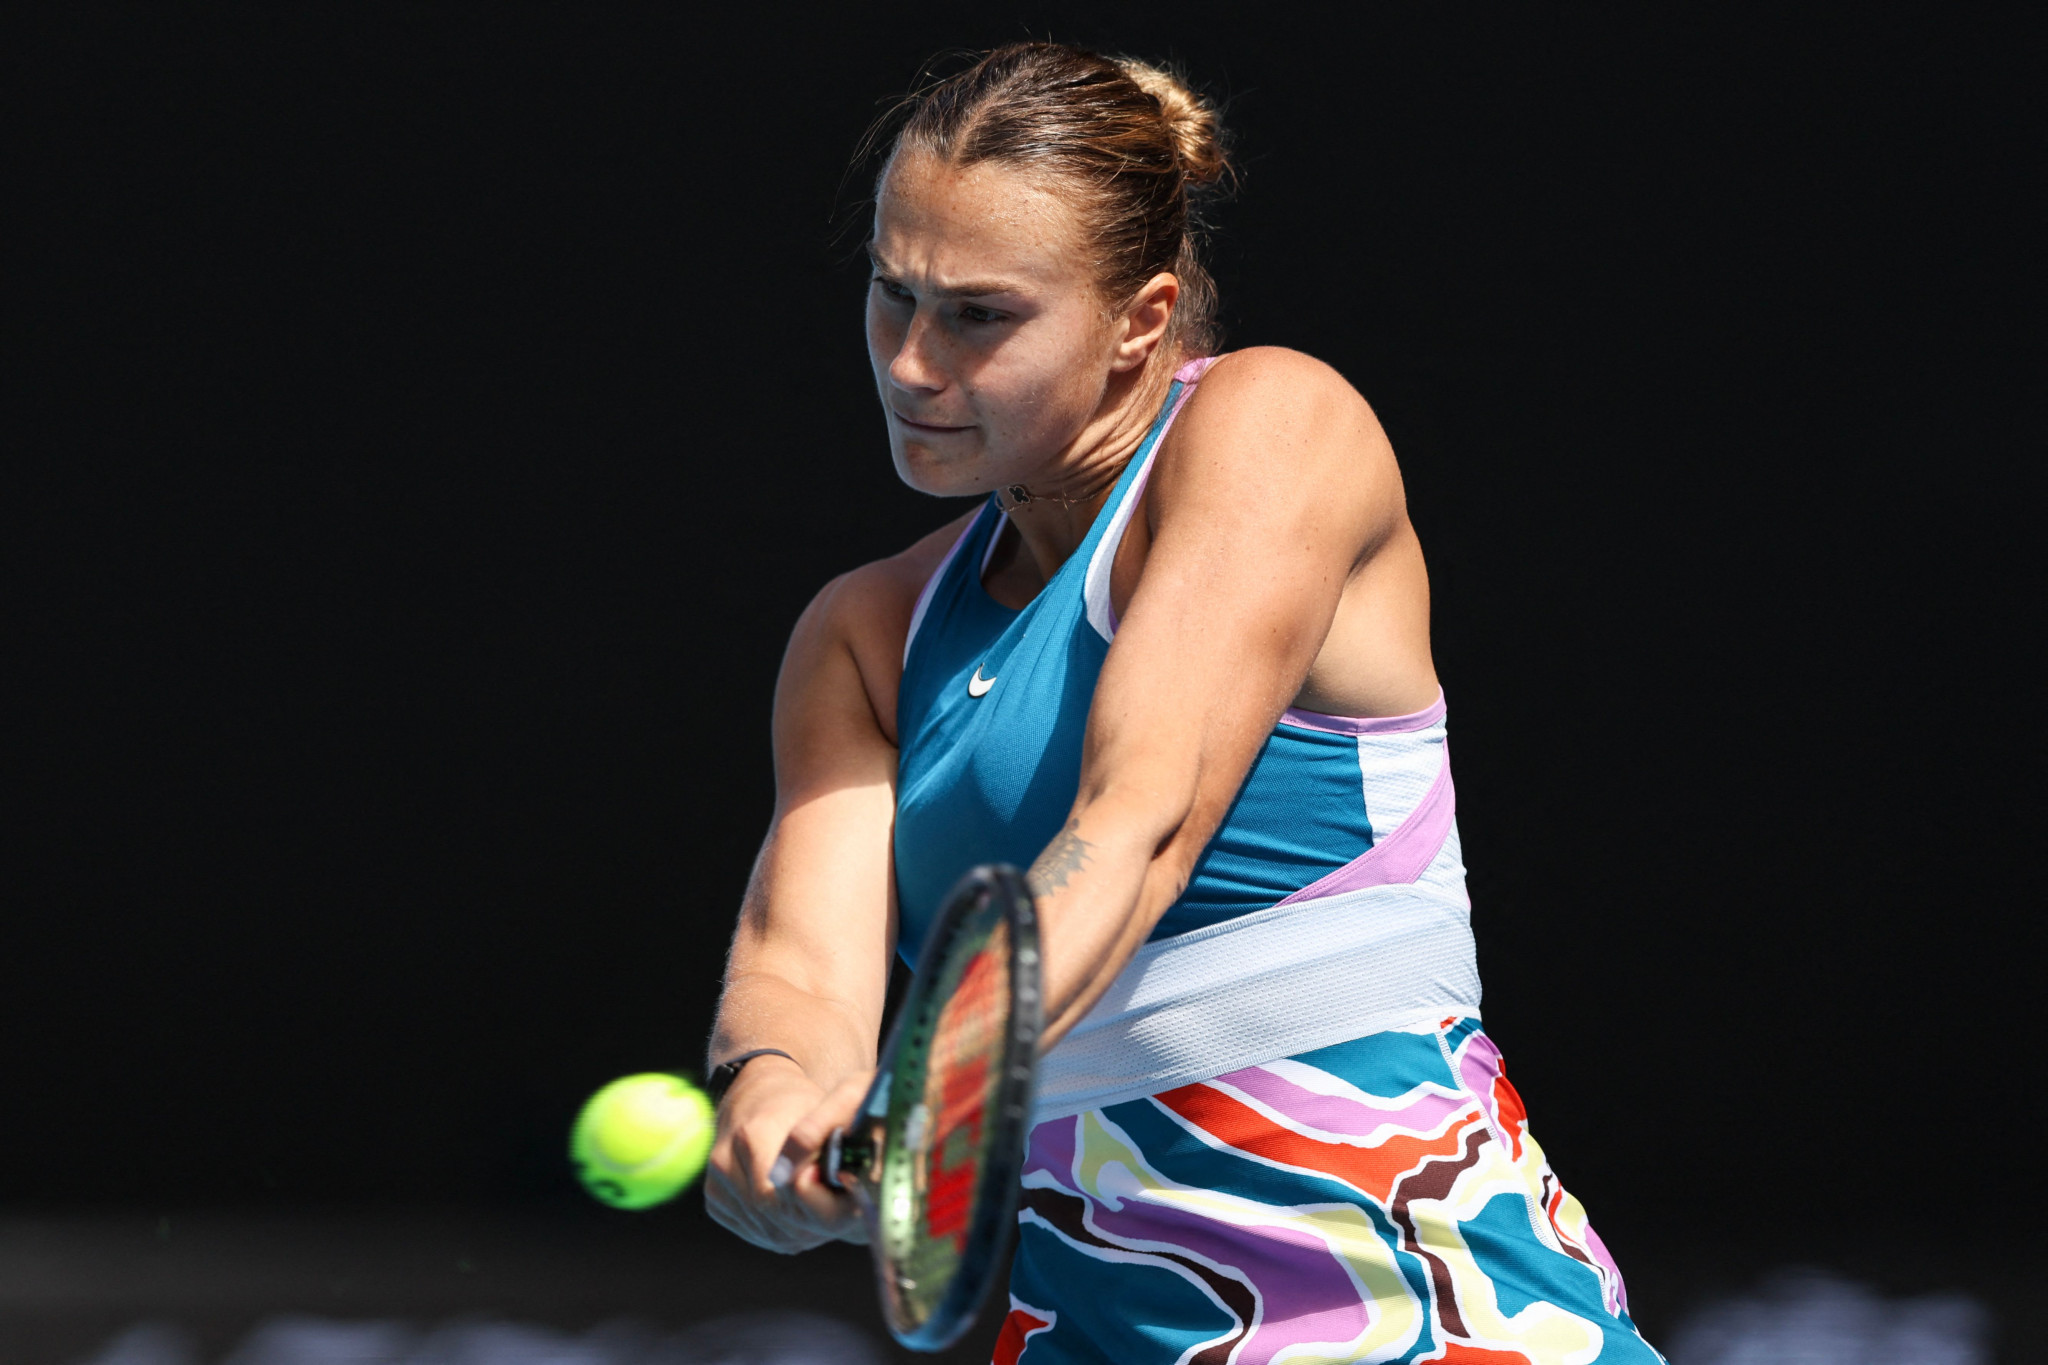 Belarusian Aryna Sabalenka, playing as a neutral, eased through against the United States' Shelby Rogers ©Getty Images